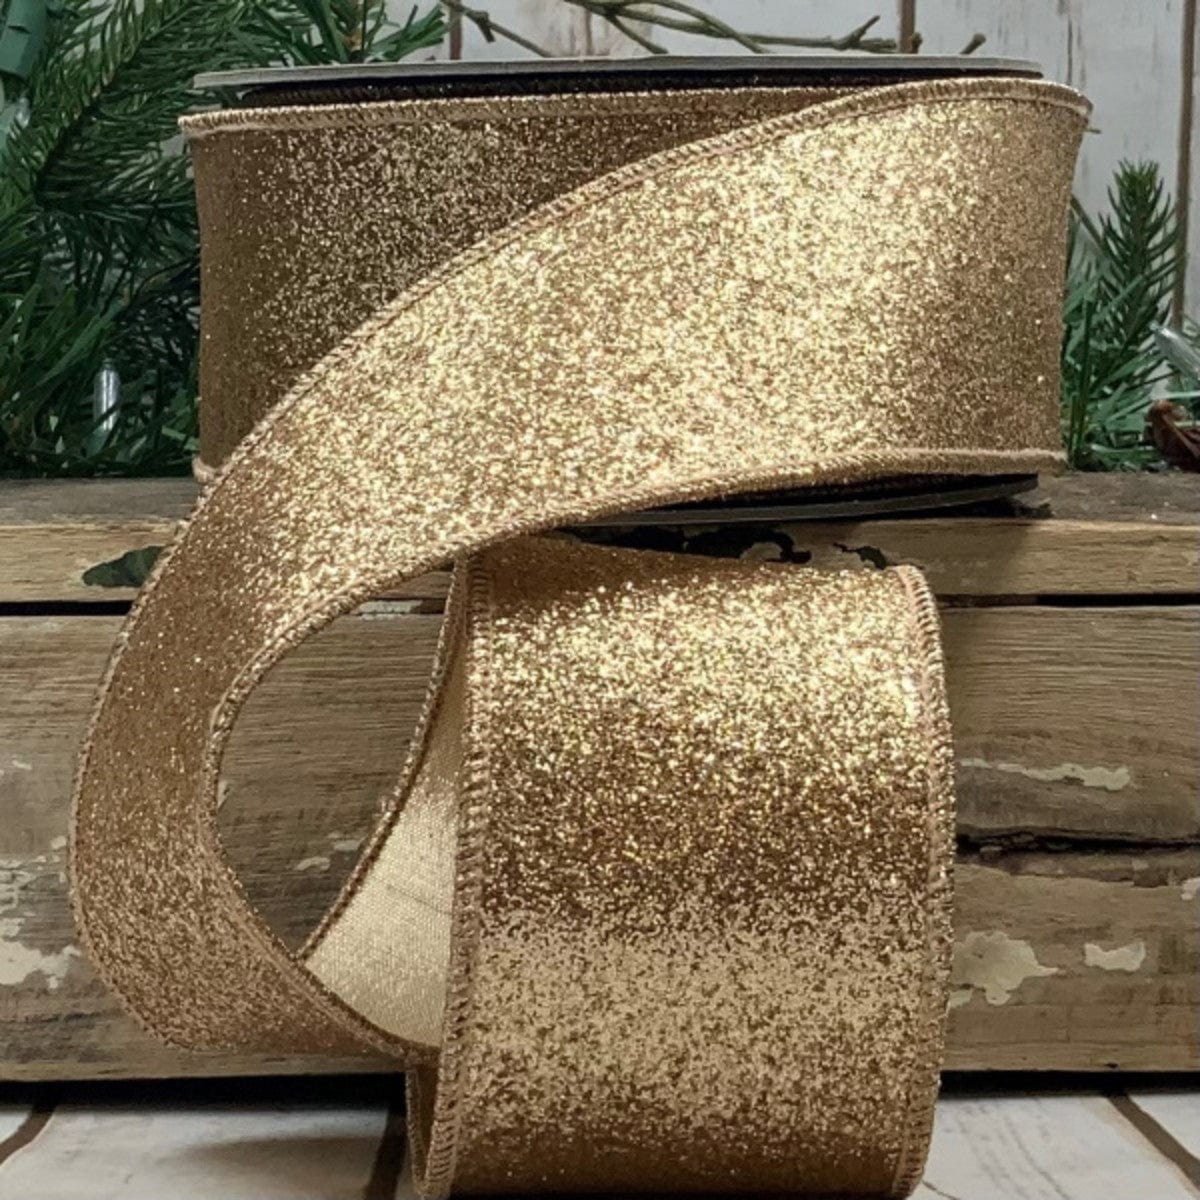 Wired Brown Glitter Ribbon, Brown Wired Ribbon, Brown Ribbon for Wreaths  and Bows 4 X 10 YARD ROLL 